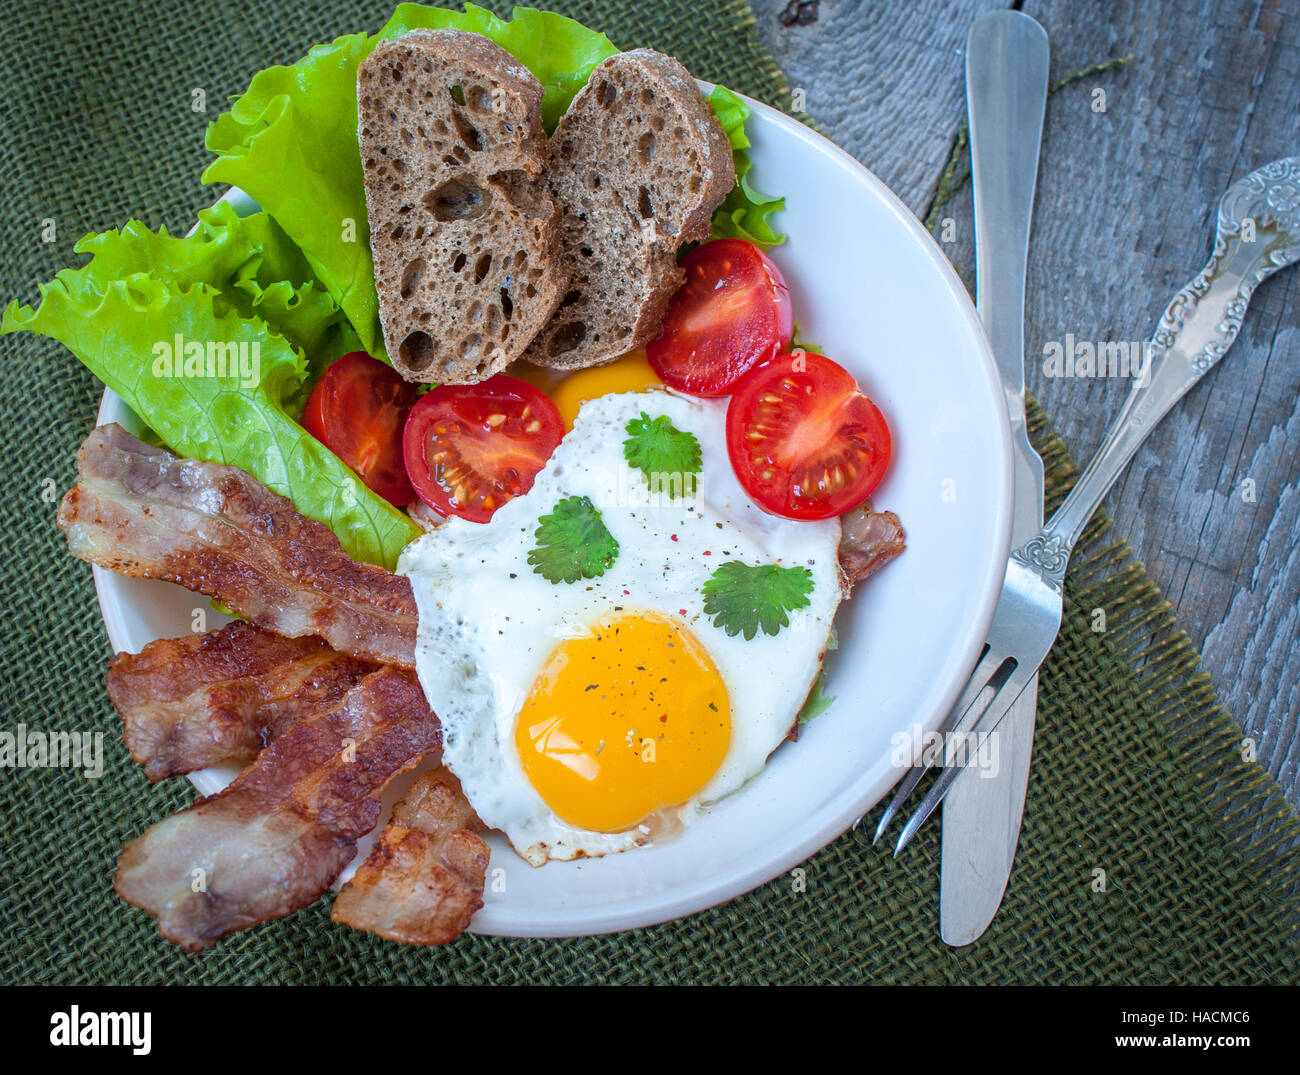 Classic hearty breakfast. Fried egg, bacon, vegetables (lettuce, tomato), greens and bread made from whole wheat flour. Stock Photo